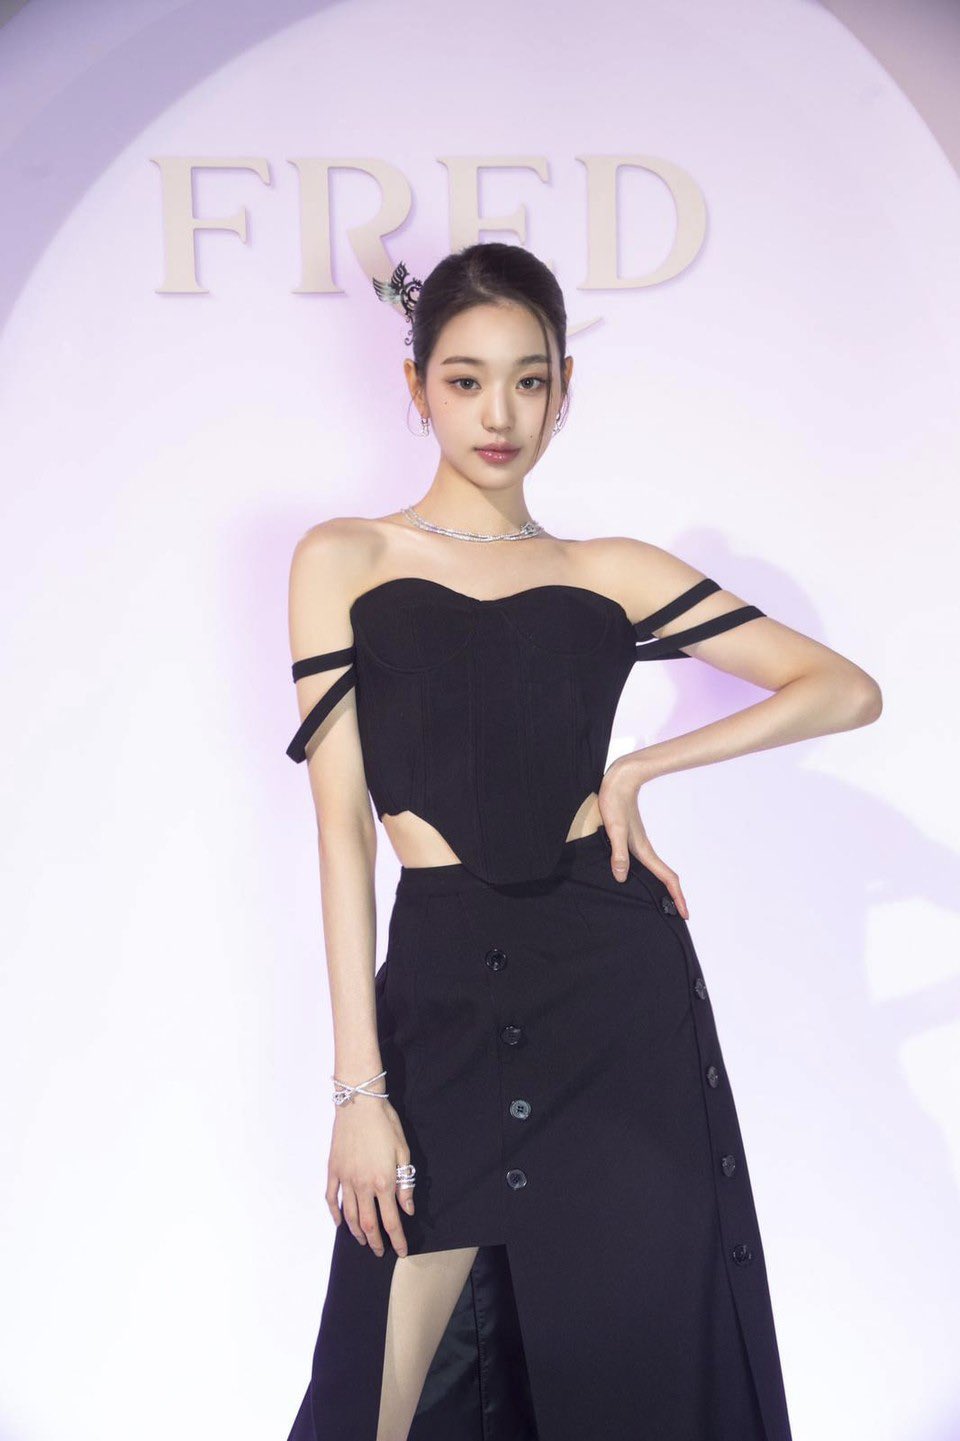 Ive's Jang Won-Young poses like a doll at Fred jewelry event